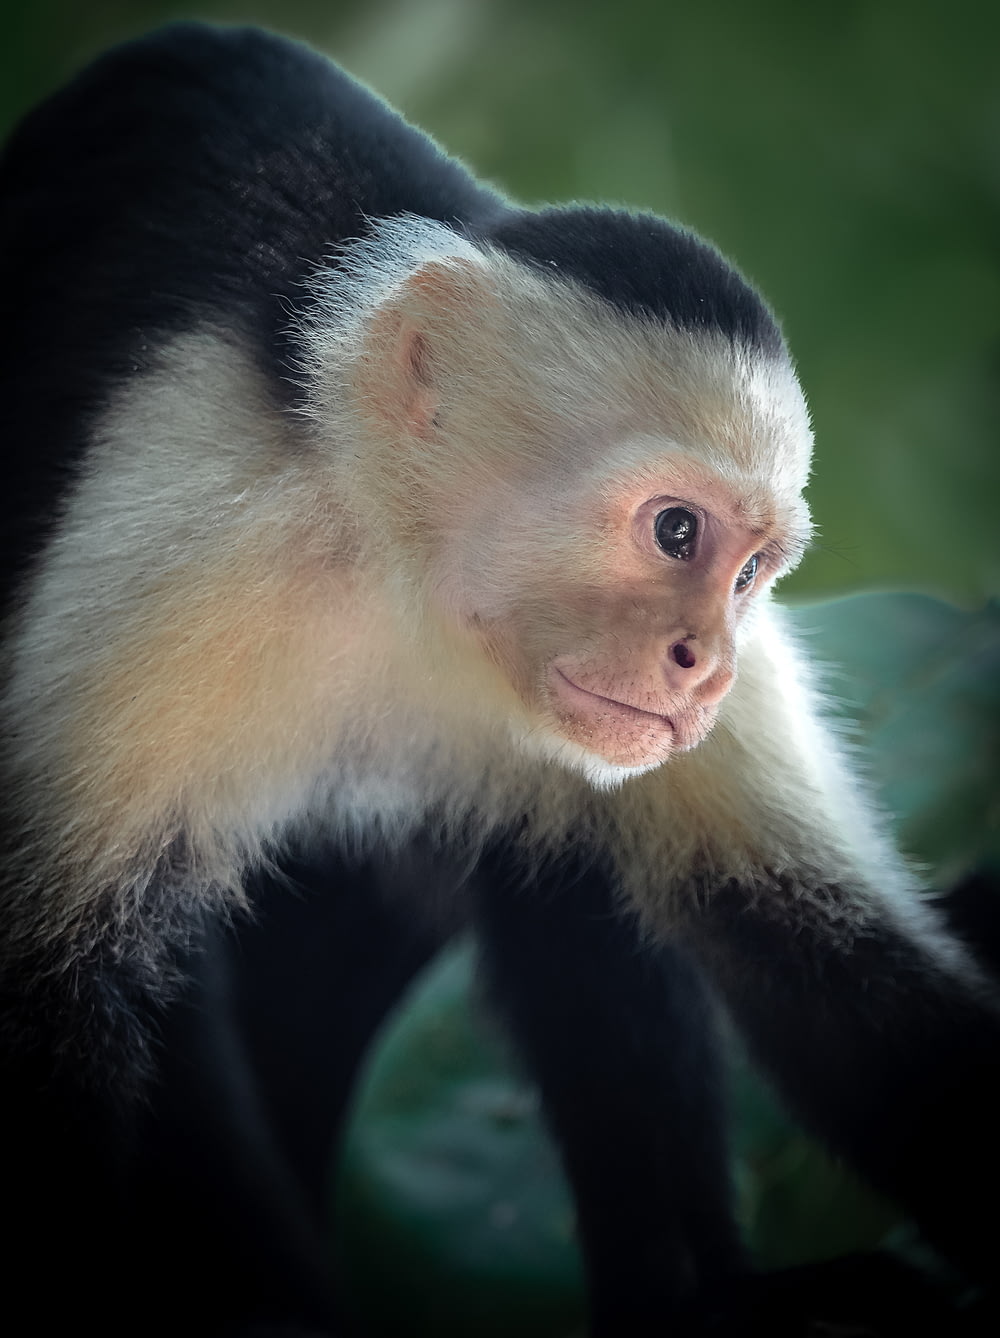 a small white and black monkey on a tree branch